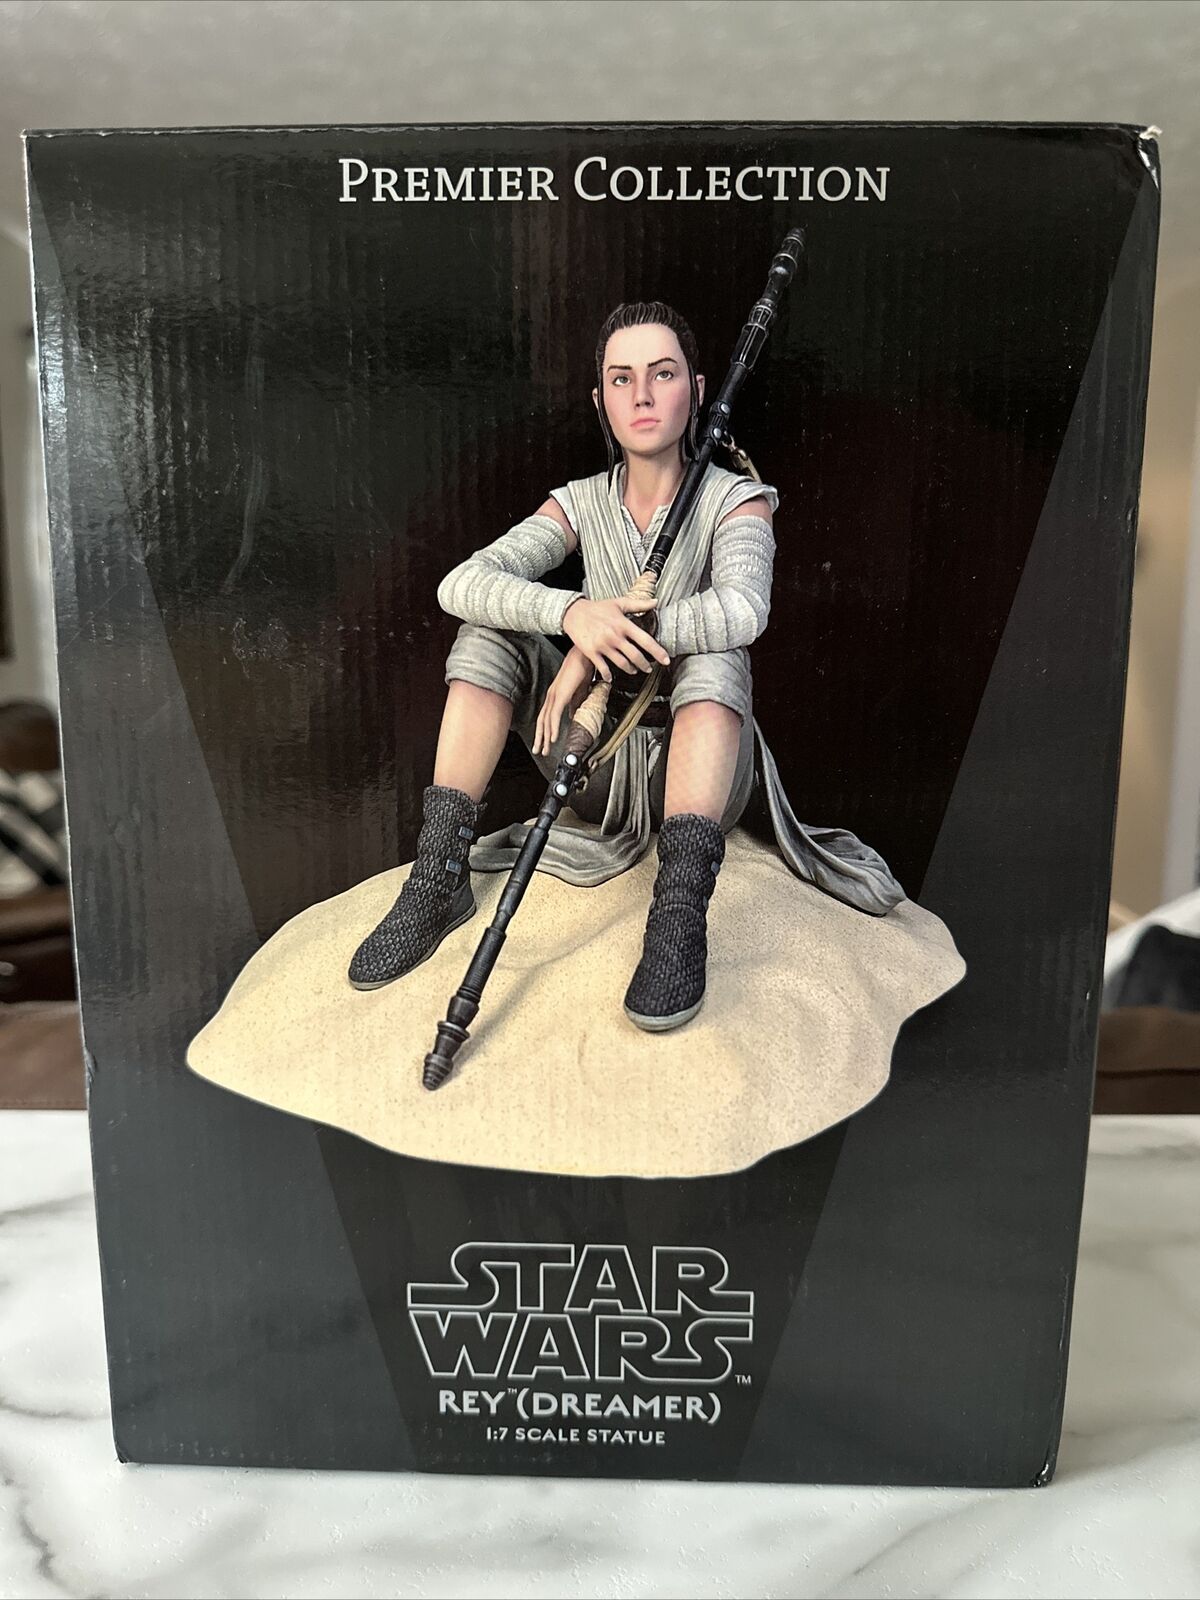 Star Wars Rey Dreamer 1:7 Scale Statue Gentle Giant New In Box Rare #165/1000